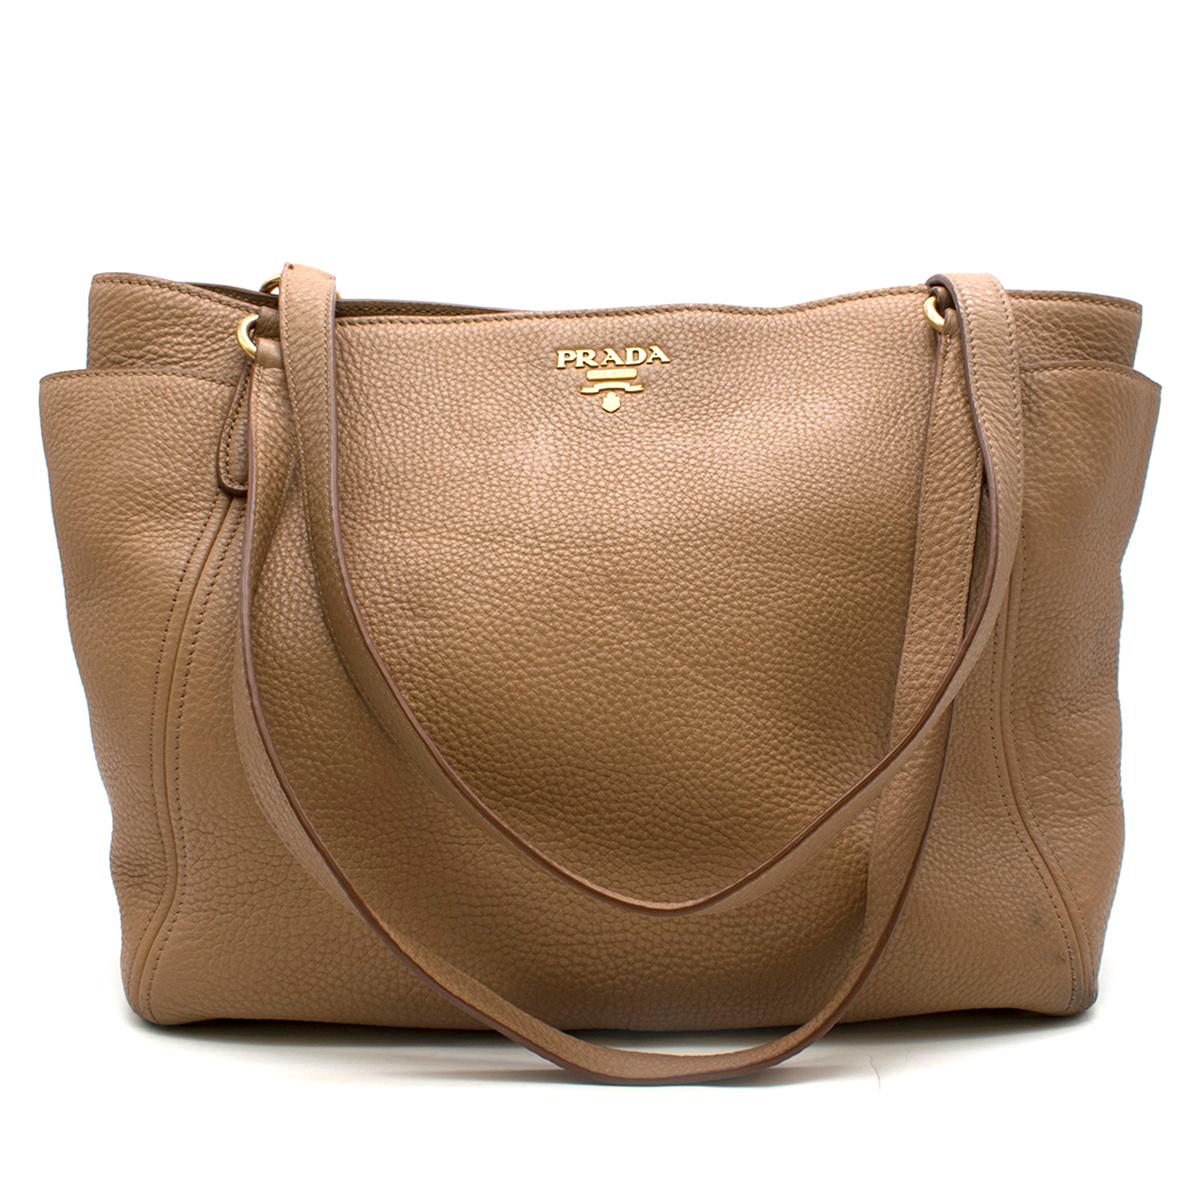 Prada Side Pocket Zip Vitello Daino

- Light Brown soft leather tote bag 
- Slouchy style
- Two side and one inside pockets 
- Shoulder strap 
- Dustbag included

Please note, these items are pre-owned and may show some signs of storage, even when